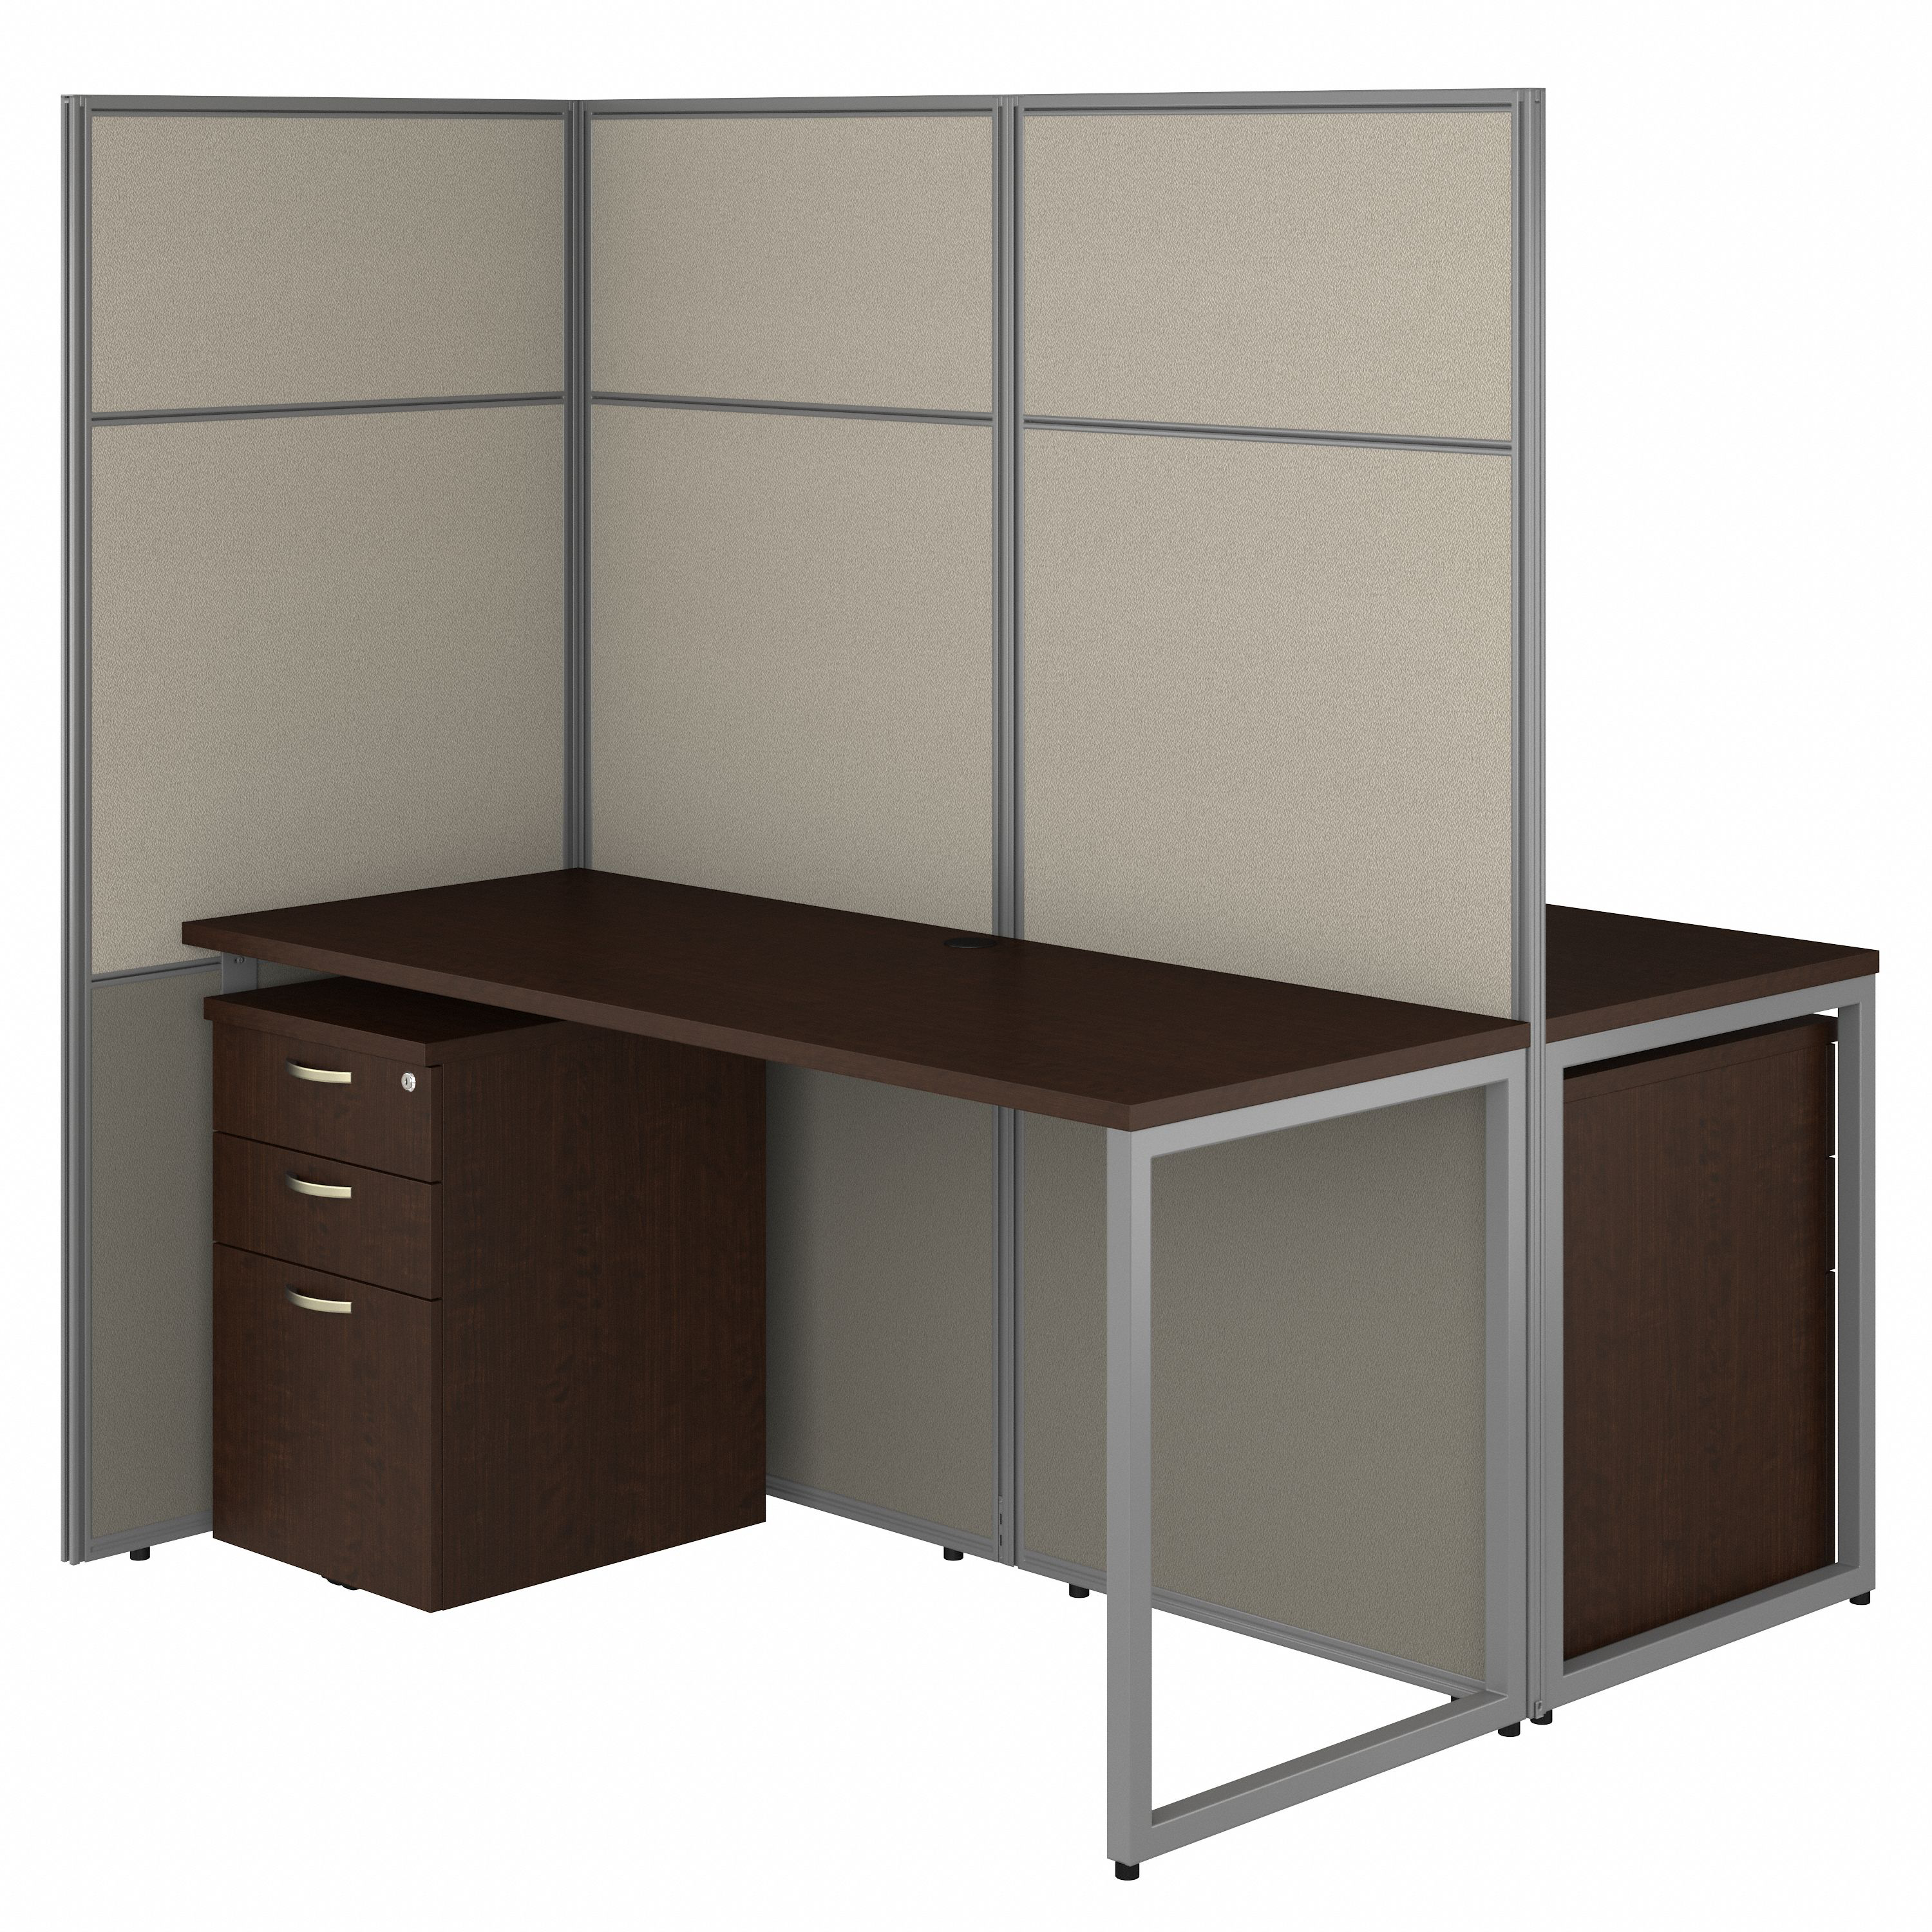 Shop Bush Business Furniture Easy Office 60W 2 Person Cubicle Desk with File Cabinets and 66H Panels 02 EODH46SMR-03K #color_mocha cherry